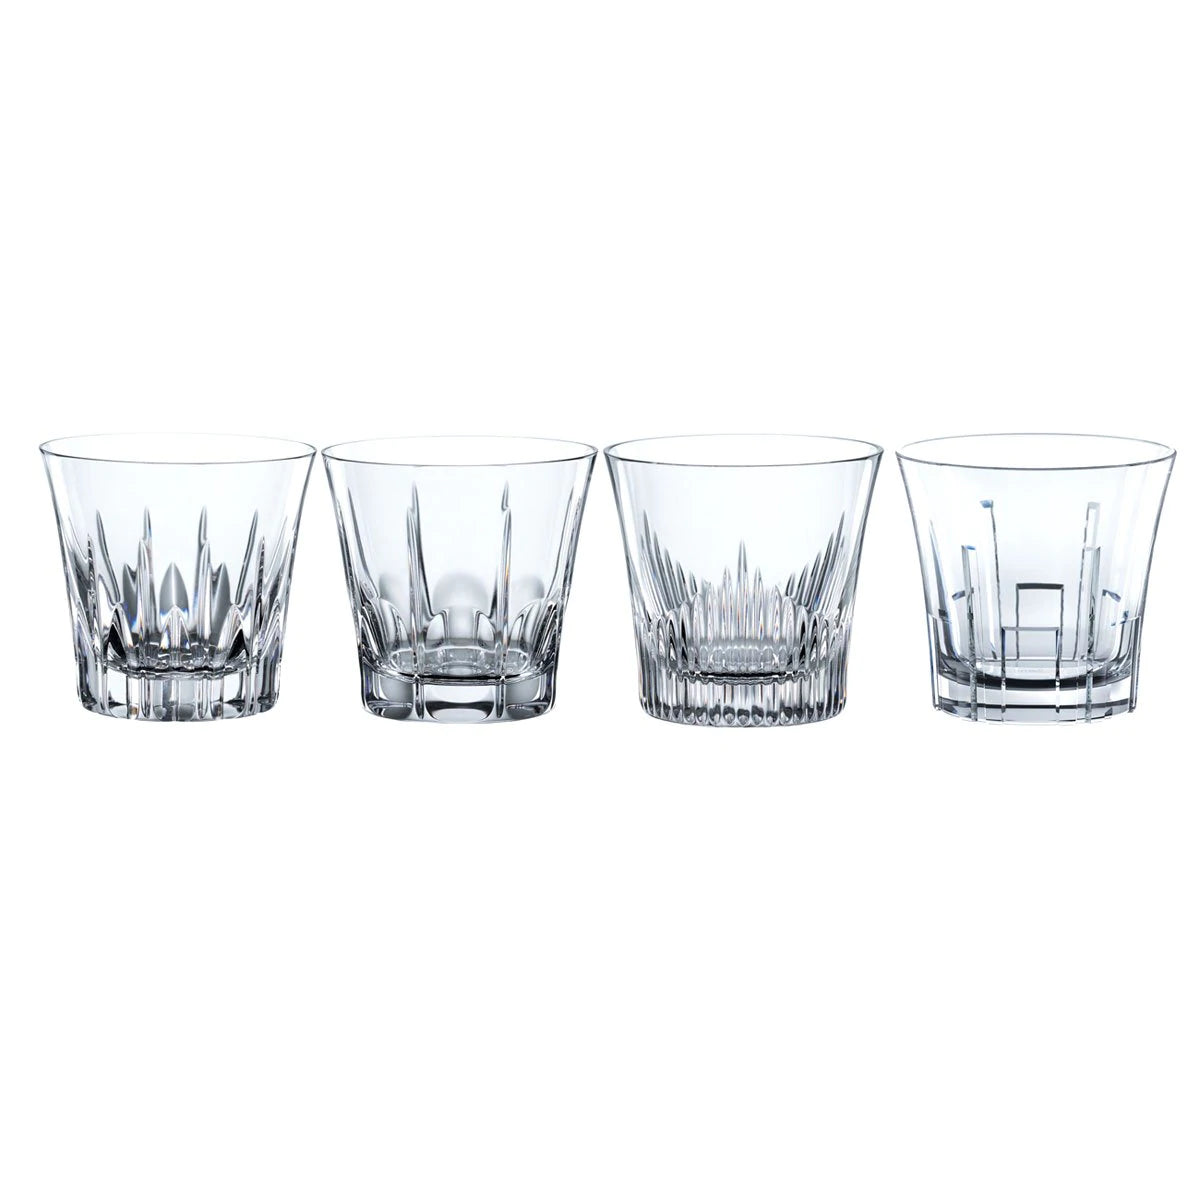 Classix Double Old Fashioned Glasses by Nachtmann  Set of 4 - 11-OZ - Royal Gift